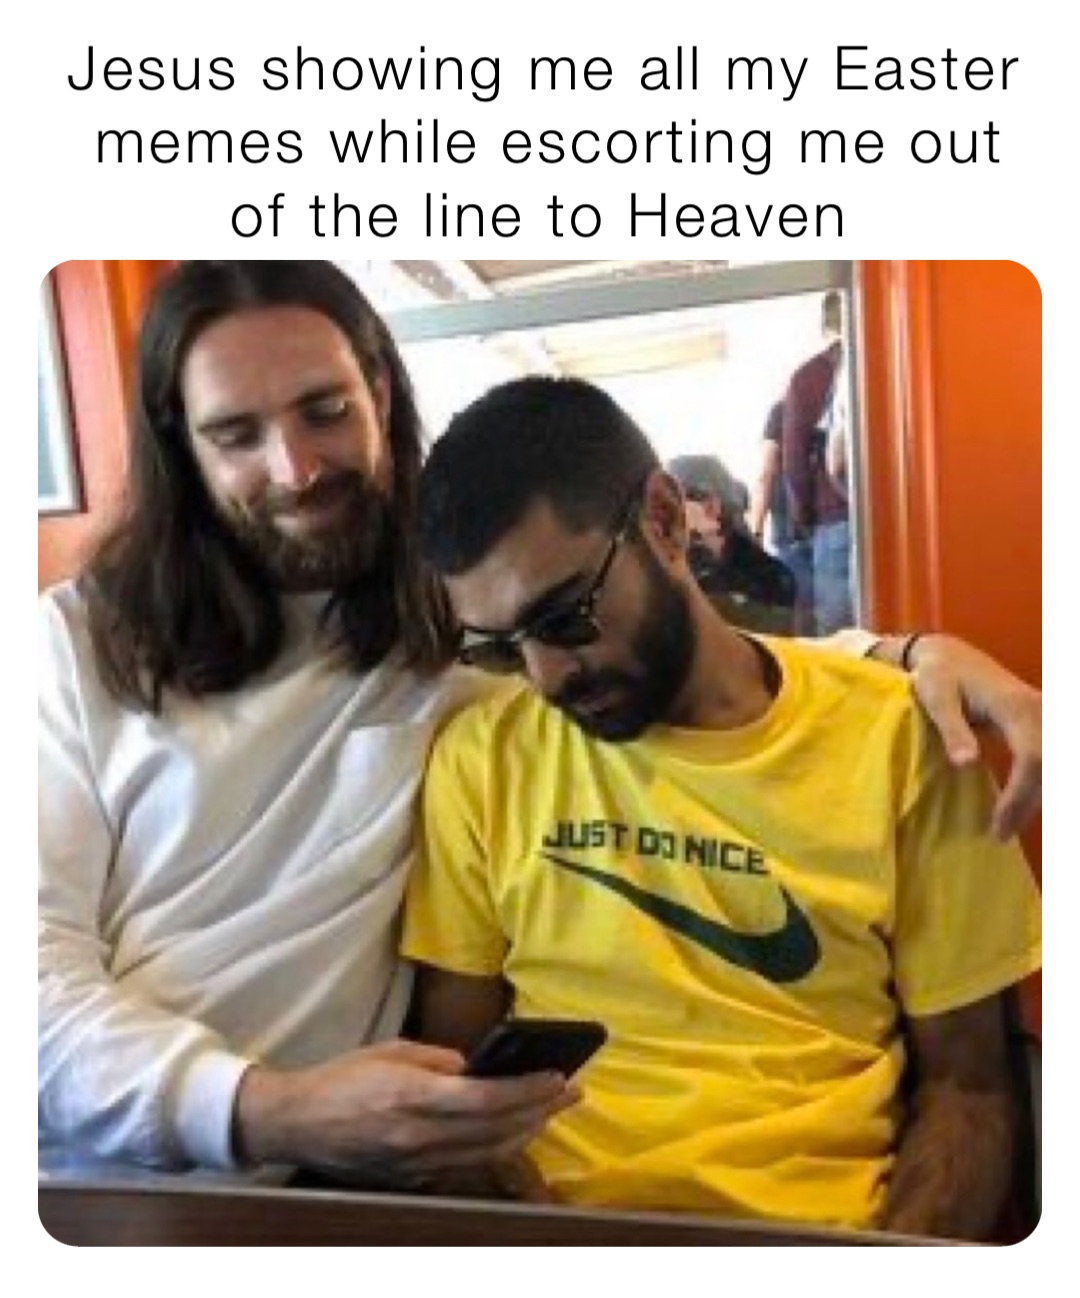 Jesus showing me all my Easter memes while escorting me out of the line to Heaven